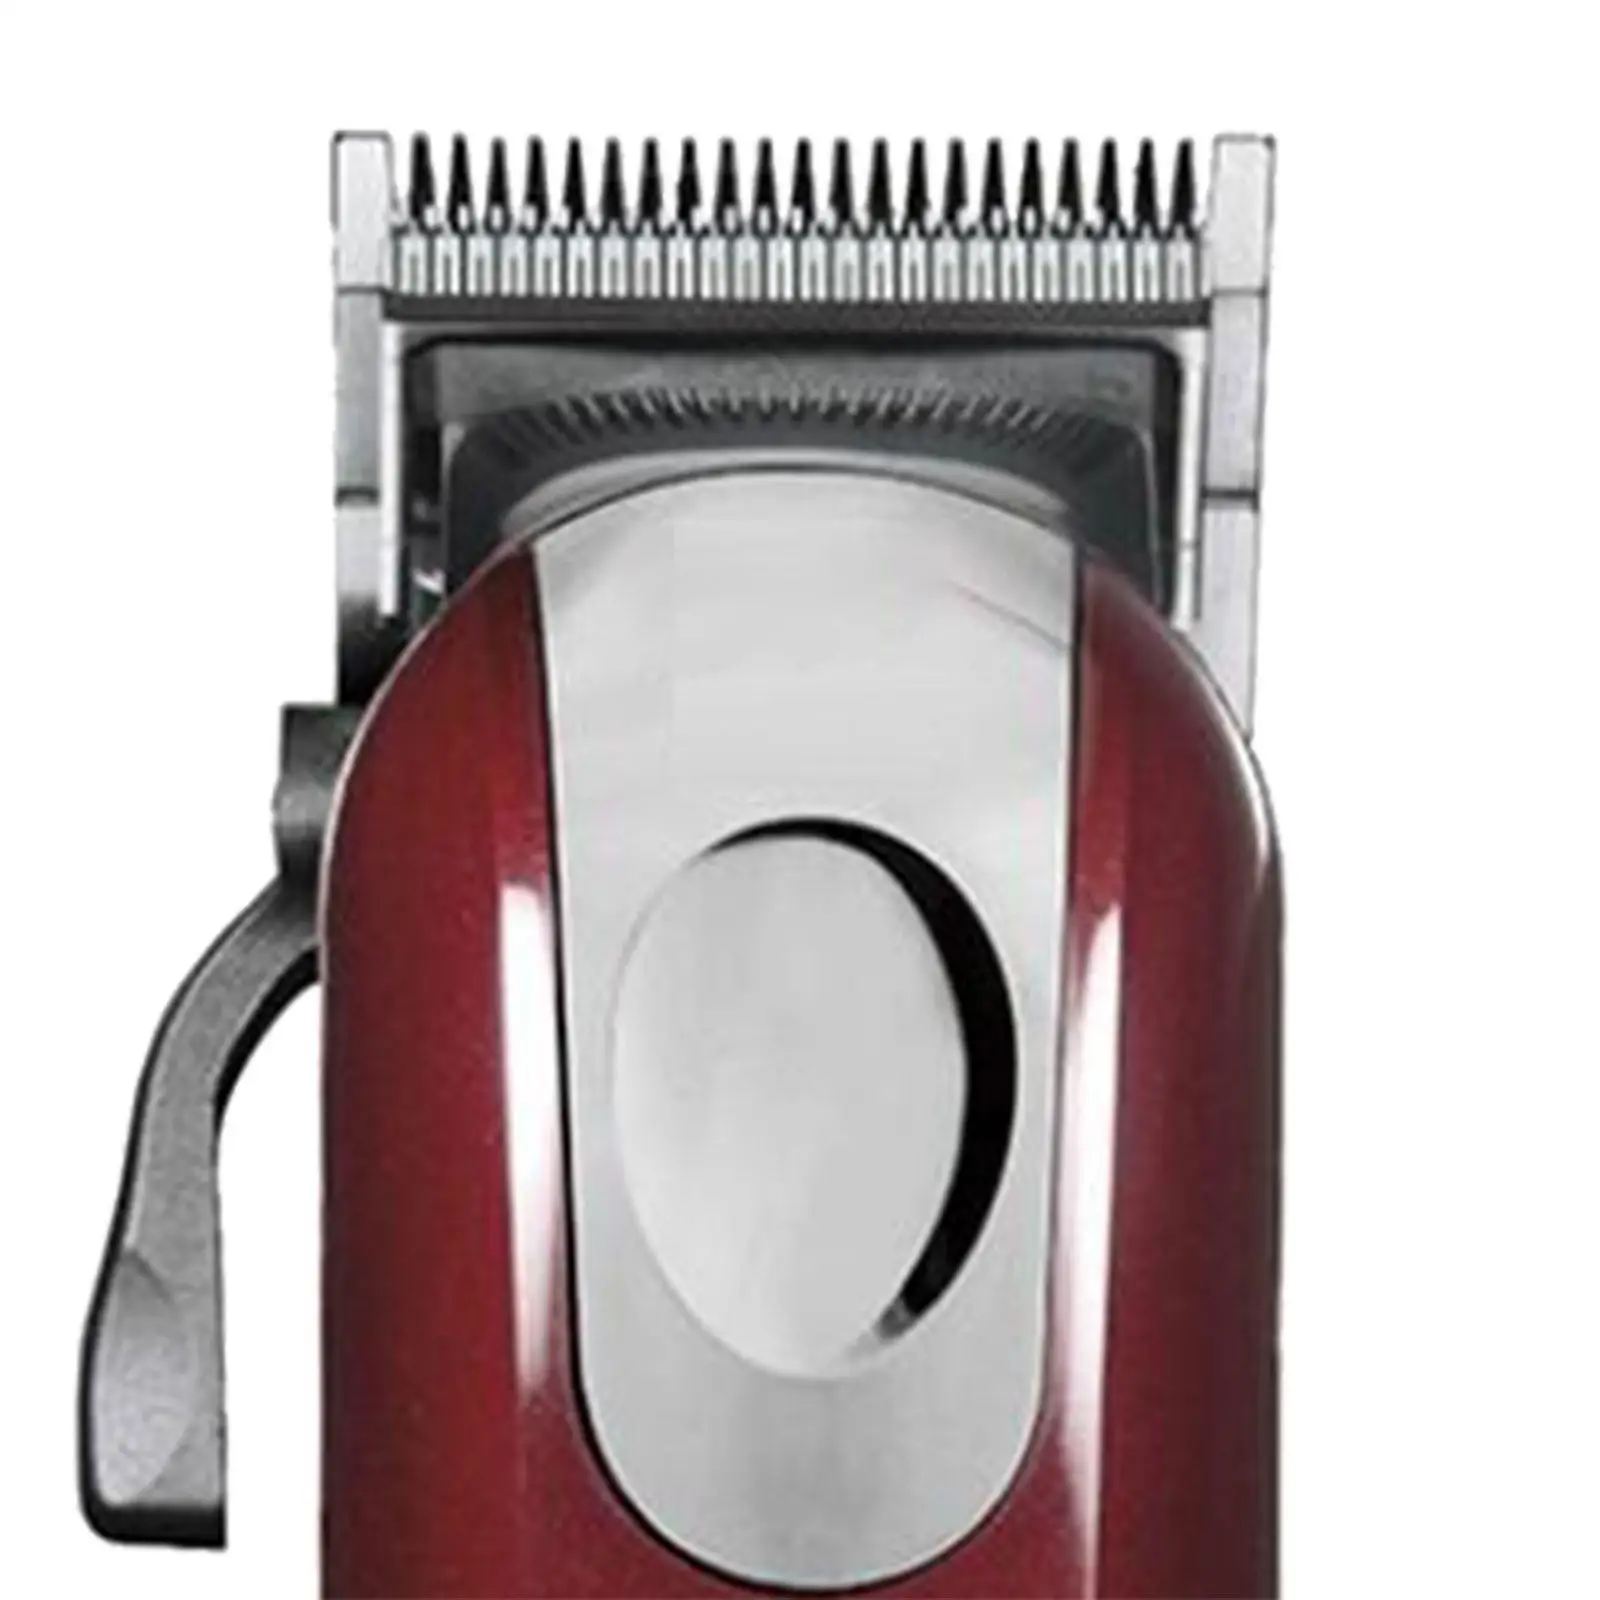 Hair Trimmer Set 8148 Barber Clipper EU Power Adapter for Stylists with Oil, Cutting Guides, Styling Comb Powerful Grooming